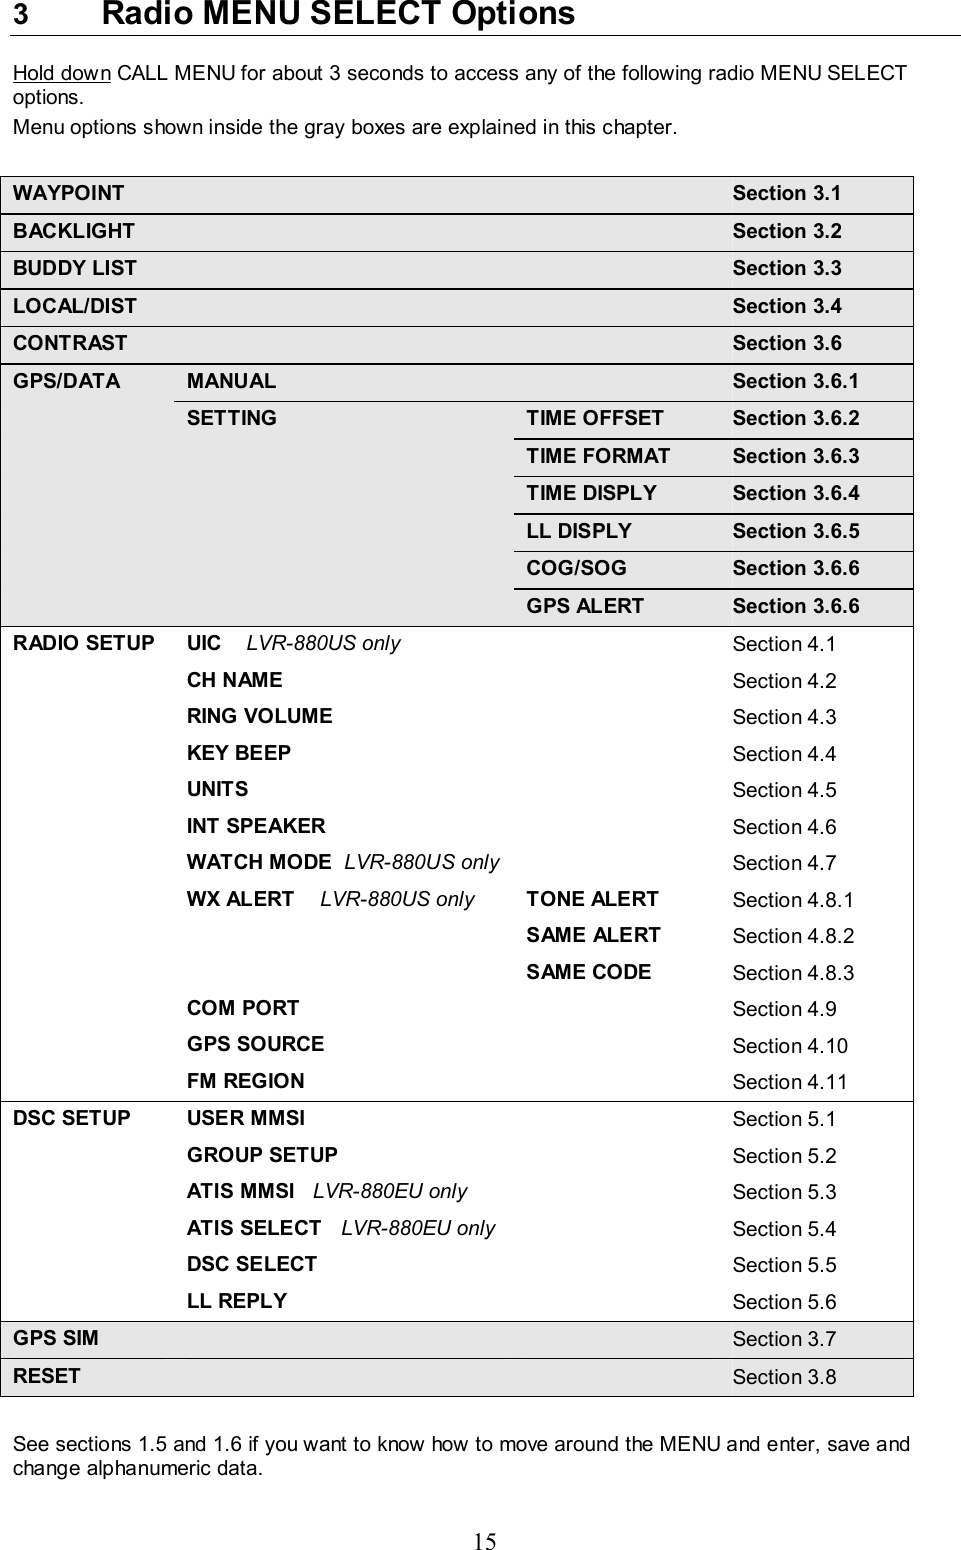 15 3  Radio MENU SELECT Options Hold down CALL MENU for about 3 seconds to access any of the following radio MENU SELECT options.  Menu options shown inside the gray boxes are explained in this chapter.  WAYPOINT   Section 3.1 BACKLIGHT    Section 3.2 BUDDY LIST     Section 3.3 LOCAL/DIST    Section 3.4 CONTRAST     Section 3.6 GPS/DATA MANUAL   Section 3.6.1  SETTING  TIME OFFSET Section 3.6.2   TIME FORMAT Section 3.6.3   TIME DISPLY Section 3.6.4   LL DISPLY  Section 3.6.5   COG/SOG Section 3.6.6   GPS ALERT  Section 3.6.6 RADIO SETUP  UIC    LVR-880US only   Section 4.1  CH NAME    Section 4.2  RING VOLUME    Section 4.3  KEY BEEP    Section 4.4  UNITS    Section 4.5  INT SPEAKER   Section 4.6   WATCH MODE  LVR-880US only   Section 4.7   WX ALERT    LVR-880US only TONE ALERT  Section 4.8.1    SAME ALERT Section 4.8.2    SAME CODE Section 4.8.3  COM PORT    Section 4.9  GPS SOURCE    Section 4.10  FM REGION    Section 4.11 DSC SETUP  USER MMSI    Section 5.1  GROUP SETUP    Section 5.2   ATIS MMSI   LVR-880EU only   Section 5.3   ATIS SELECT   LVR-880EU only   Section 5.4  DSC SELECT  Section 5.5  LL REPLY    Section 5.6 GPS SIM      Section 3.7 RESET      Section 3.8  See sections 1.5 and 1.6 if you want to know how to move around the MENU and enter, save and change alphanumeric data.   